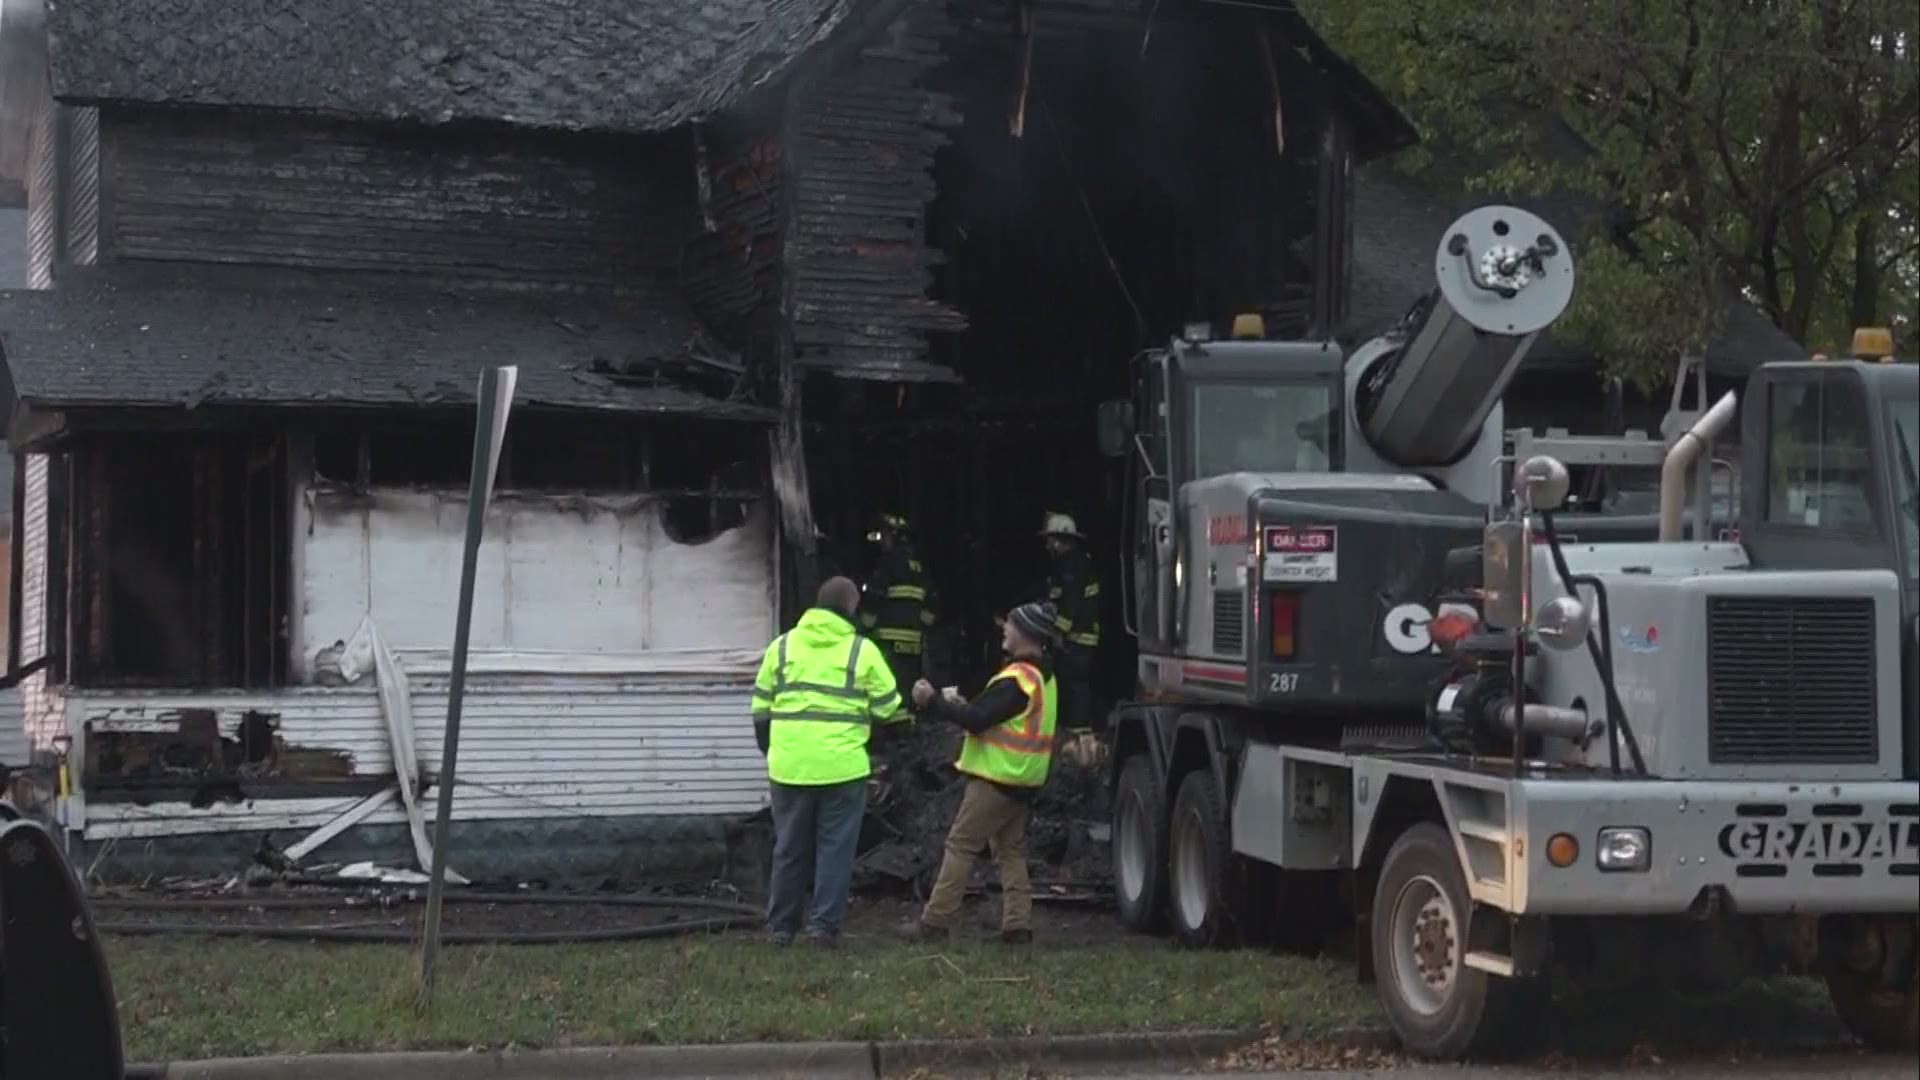 A fire destroyed a home in Muskegon. One person may have been inside but has not been found.